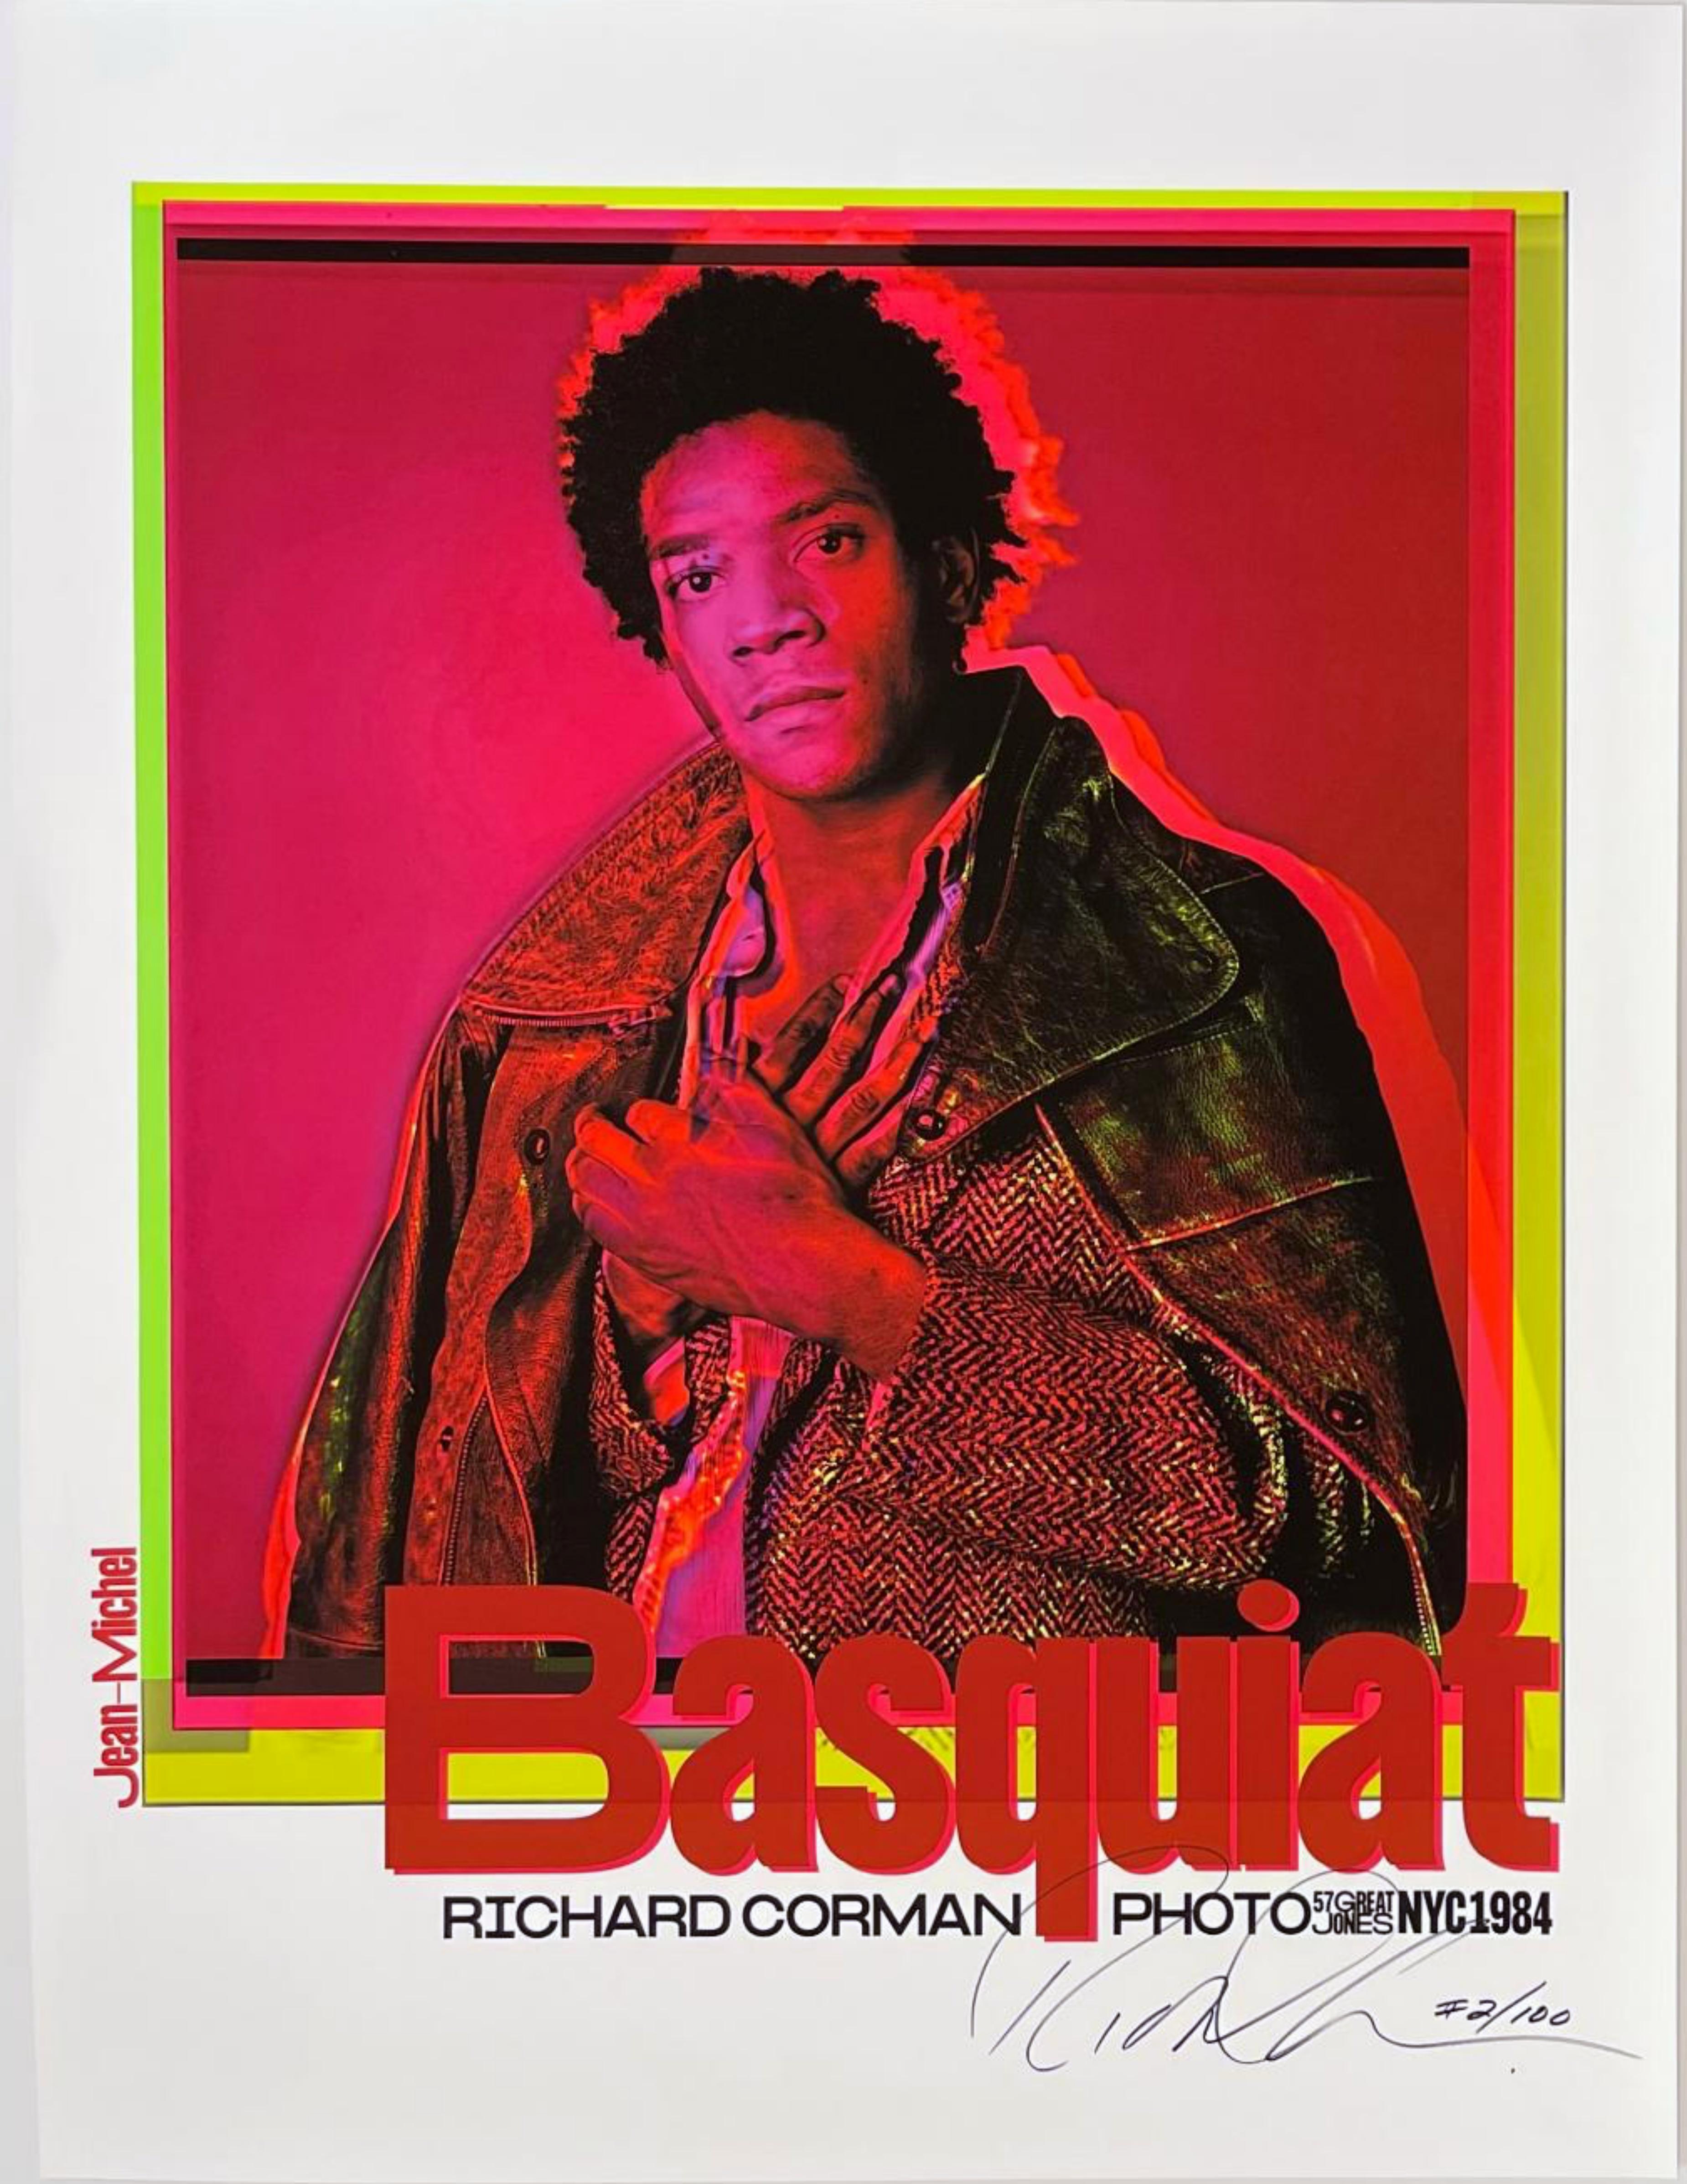 Richard Corman
Jean-Michel Basquiat 1984 (Red), 2020
Offset lithograph poster on color archival pigment paper
Signed and numbered 2/100 by Richard Corman in silver sharpie on the front
32 × 24 inches
Unframed
This dazzling limited edition hand